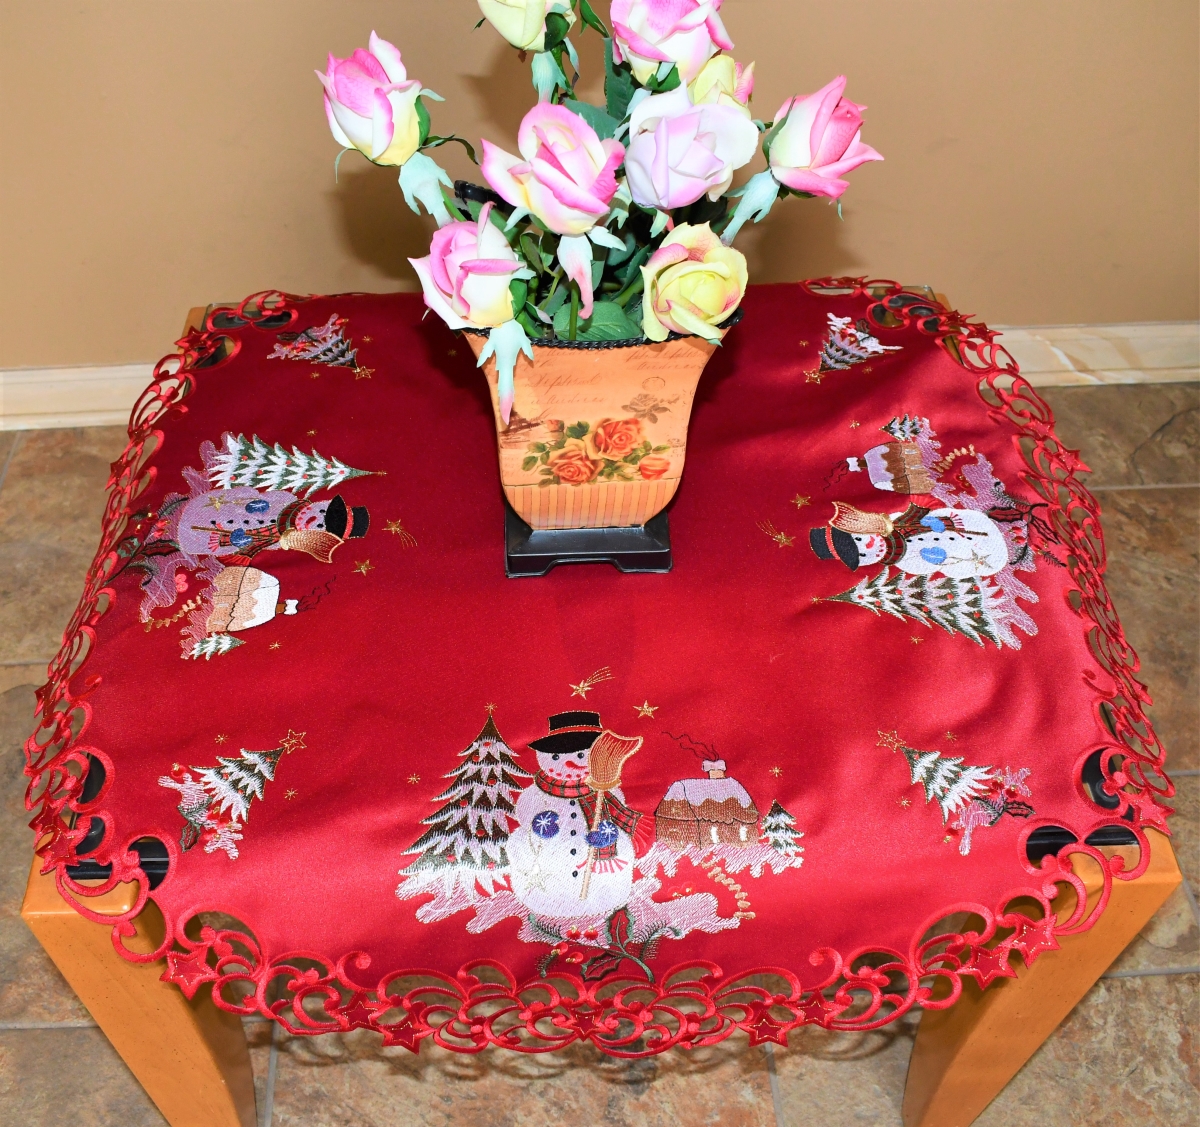 Picture of Sinobrite H8508-34x34RD 34 x 34 in. Snowman on Red Fabric Round Table Topper